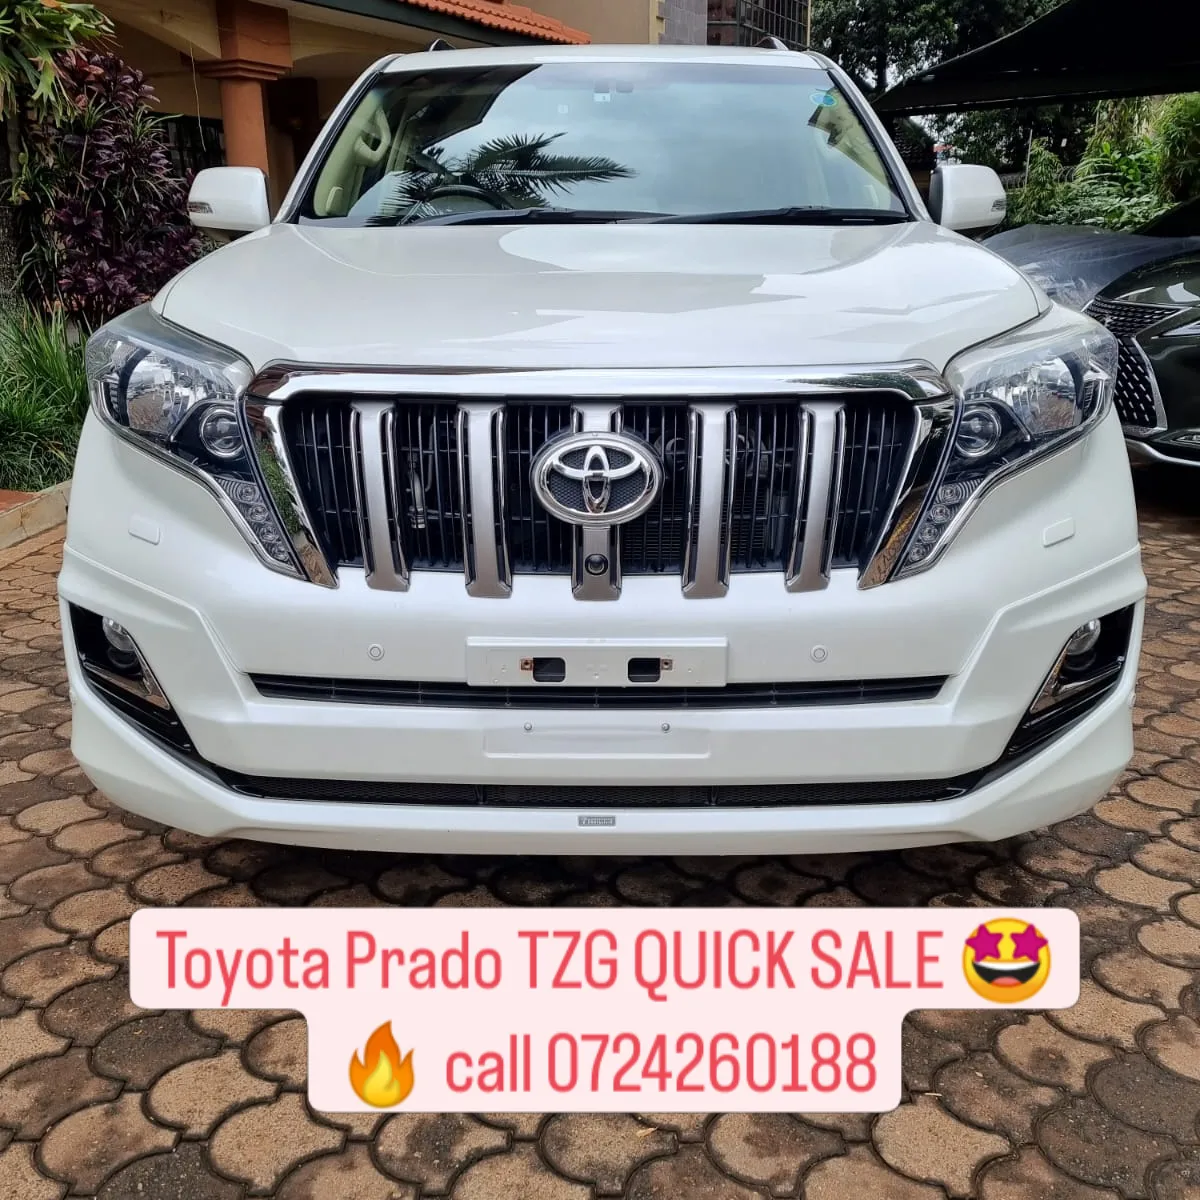 Car/motor vehicle Cars For Sale in Kenya-Toyota Prado TZG QUICK SALE Fully loaded trade in Ok EXCLUSIVE Hire purchase installments New sunroof leather 9